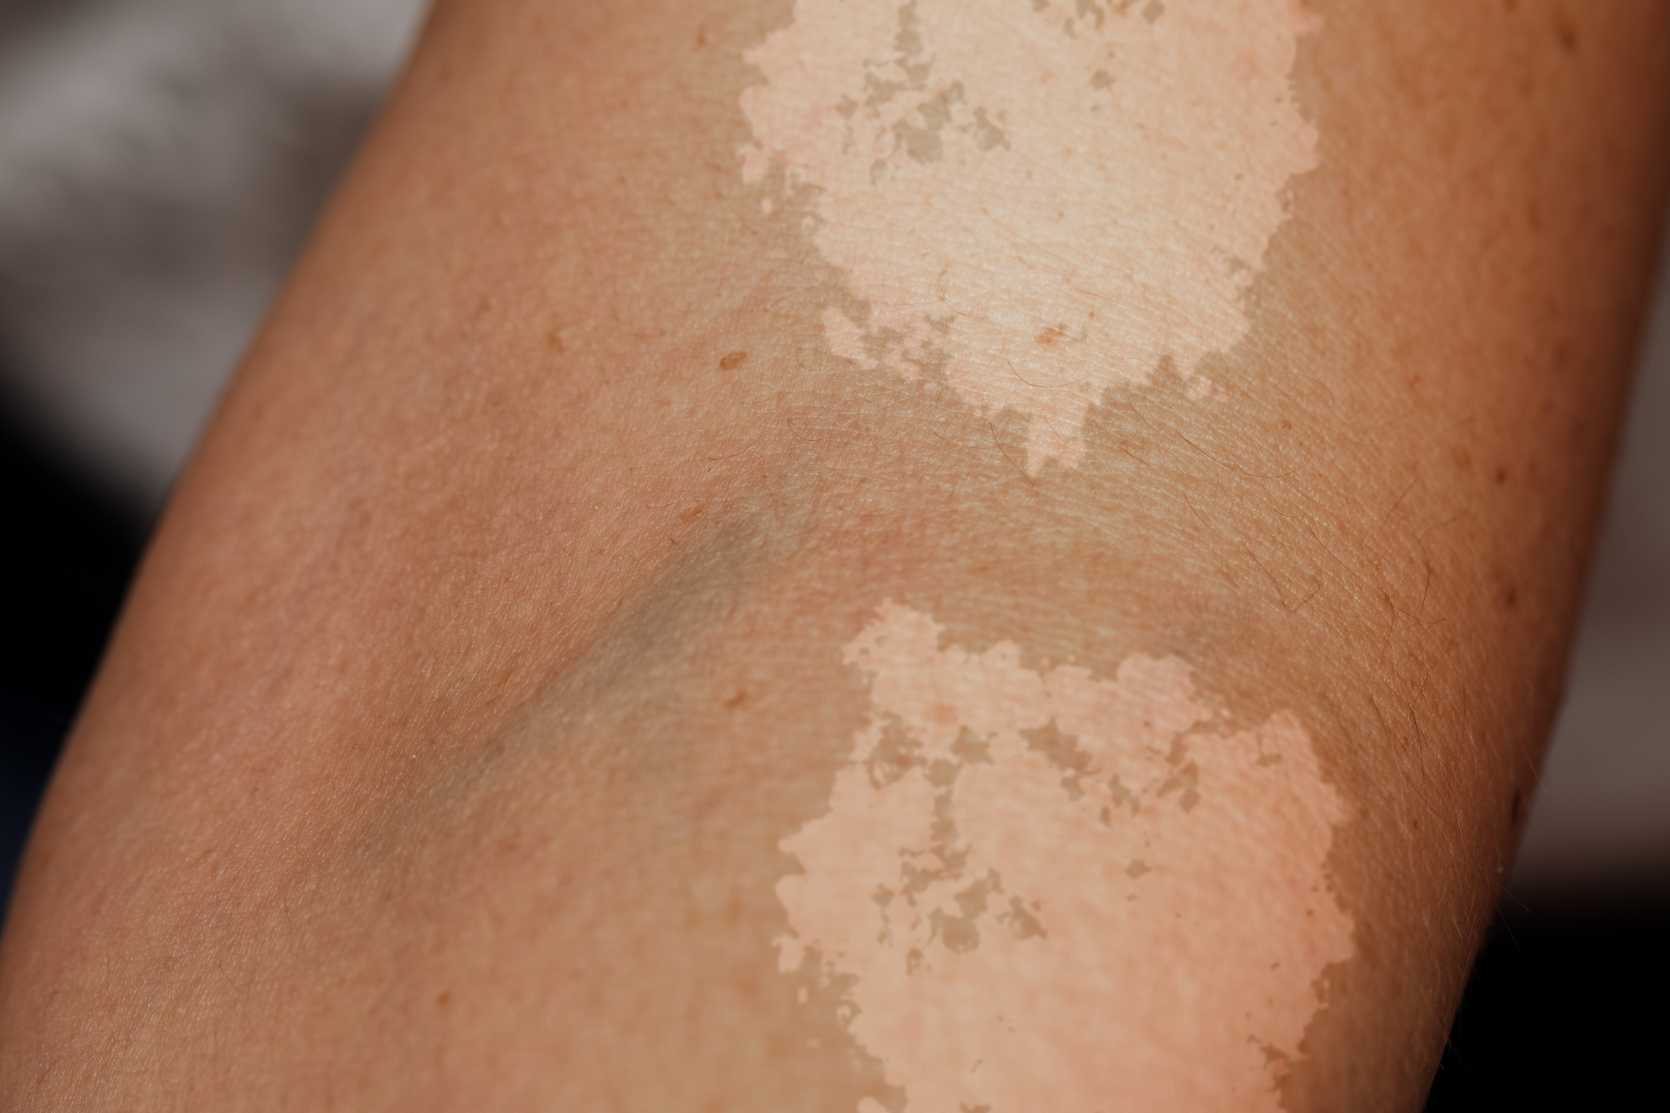 discoloration of the skin